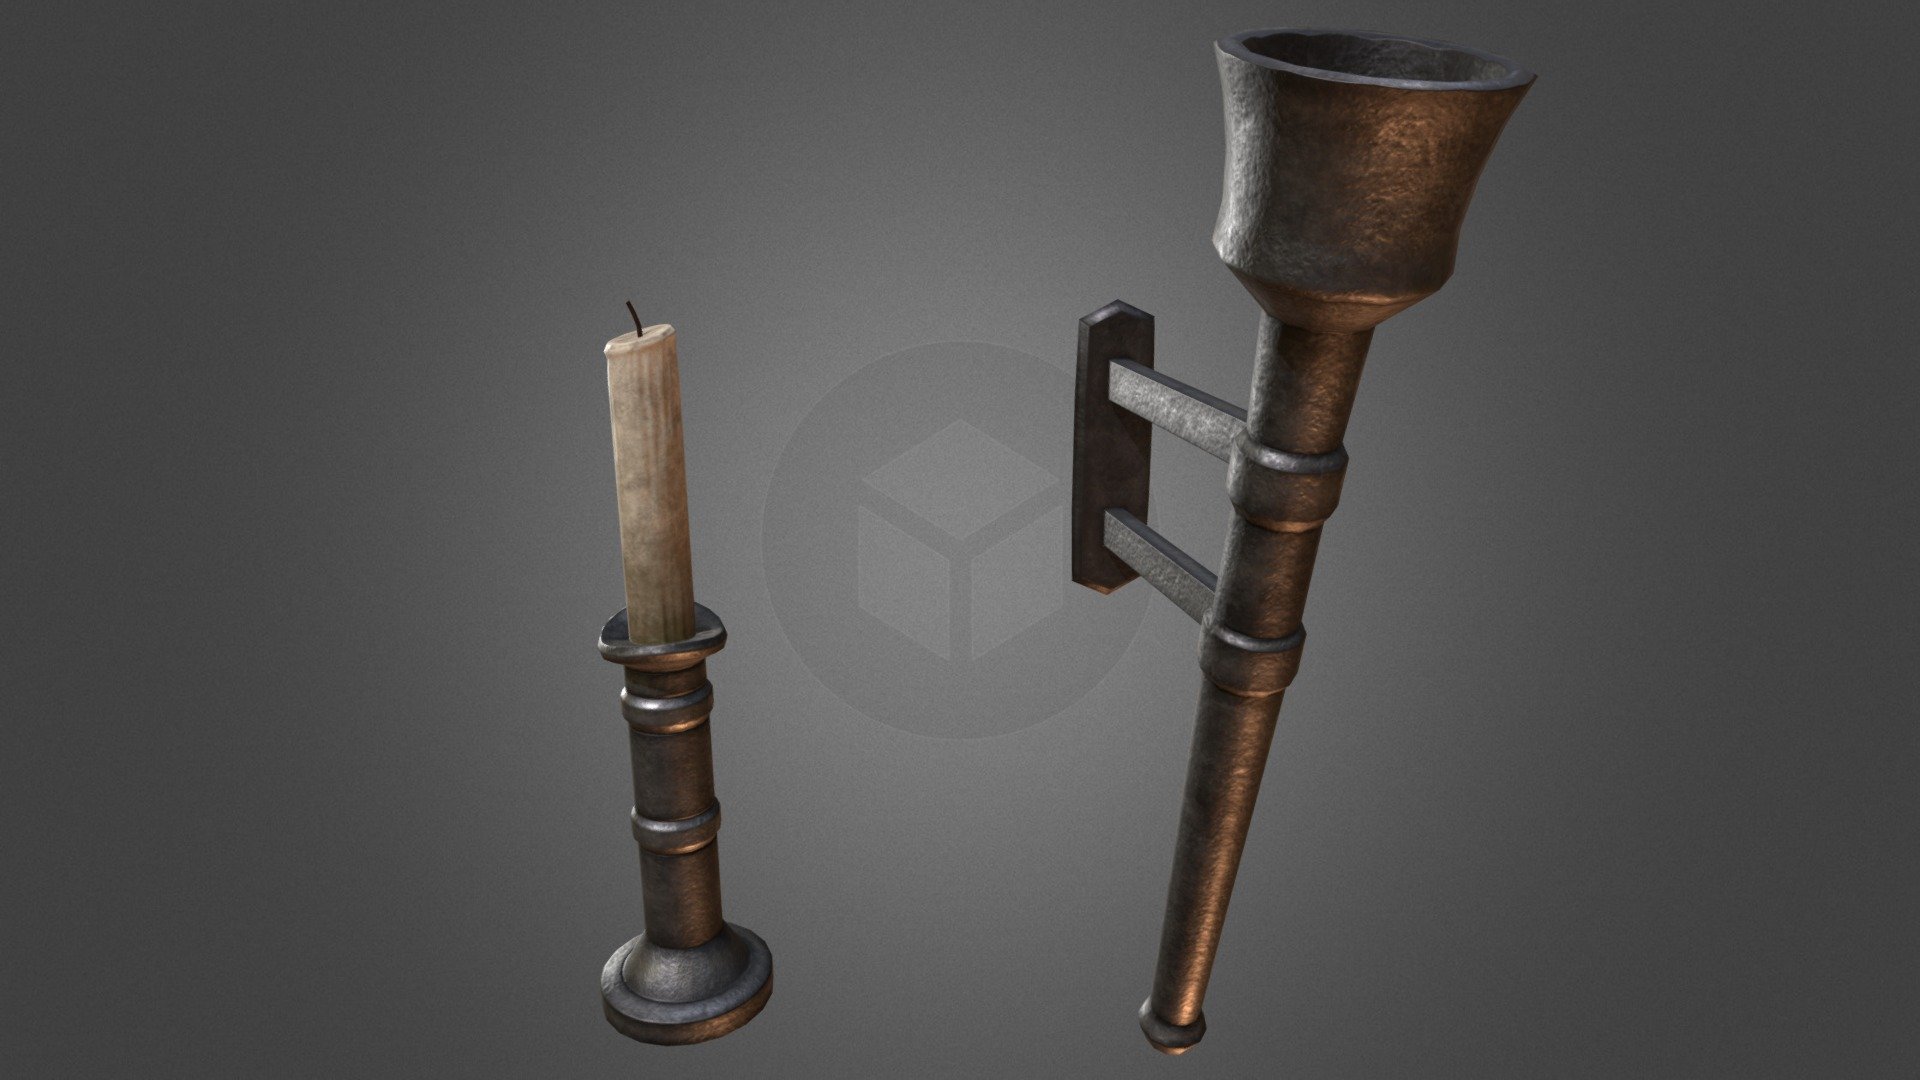 Candle and torch - 3D model by Thomas Hainsworth (@ThomasHainsworth) 3d model